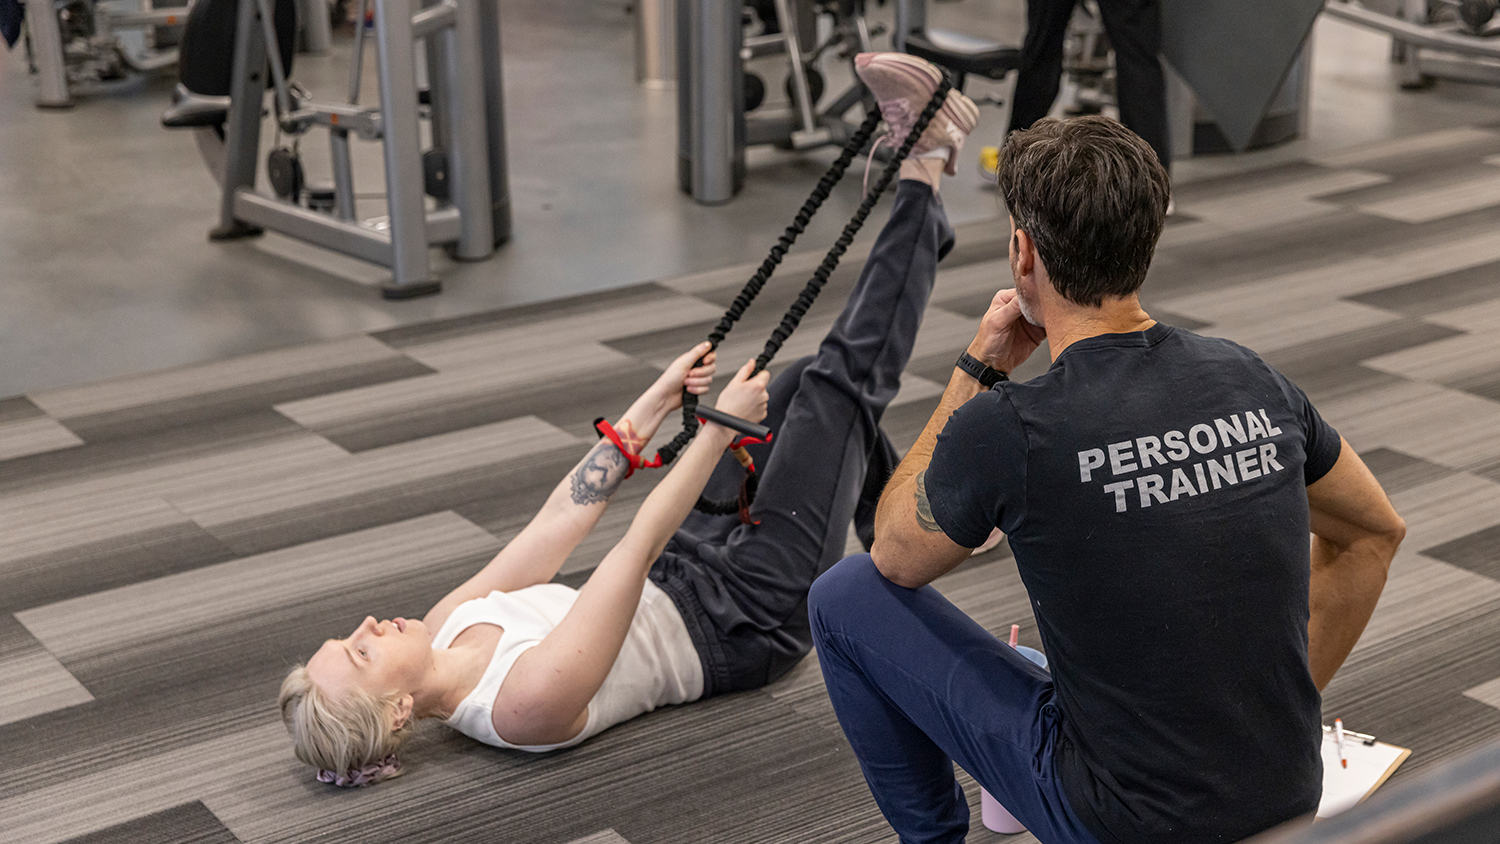 A personal trainer helps a client stretch.